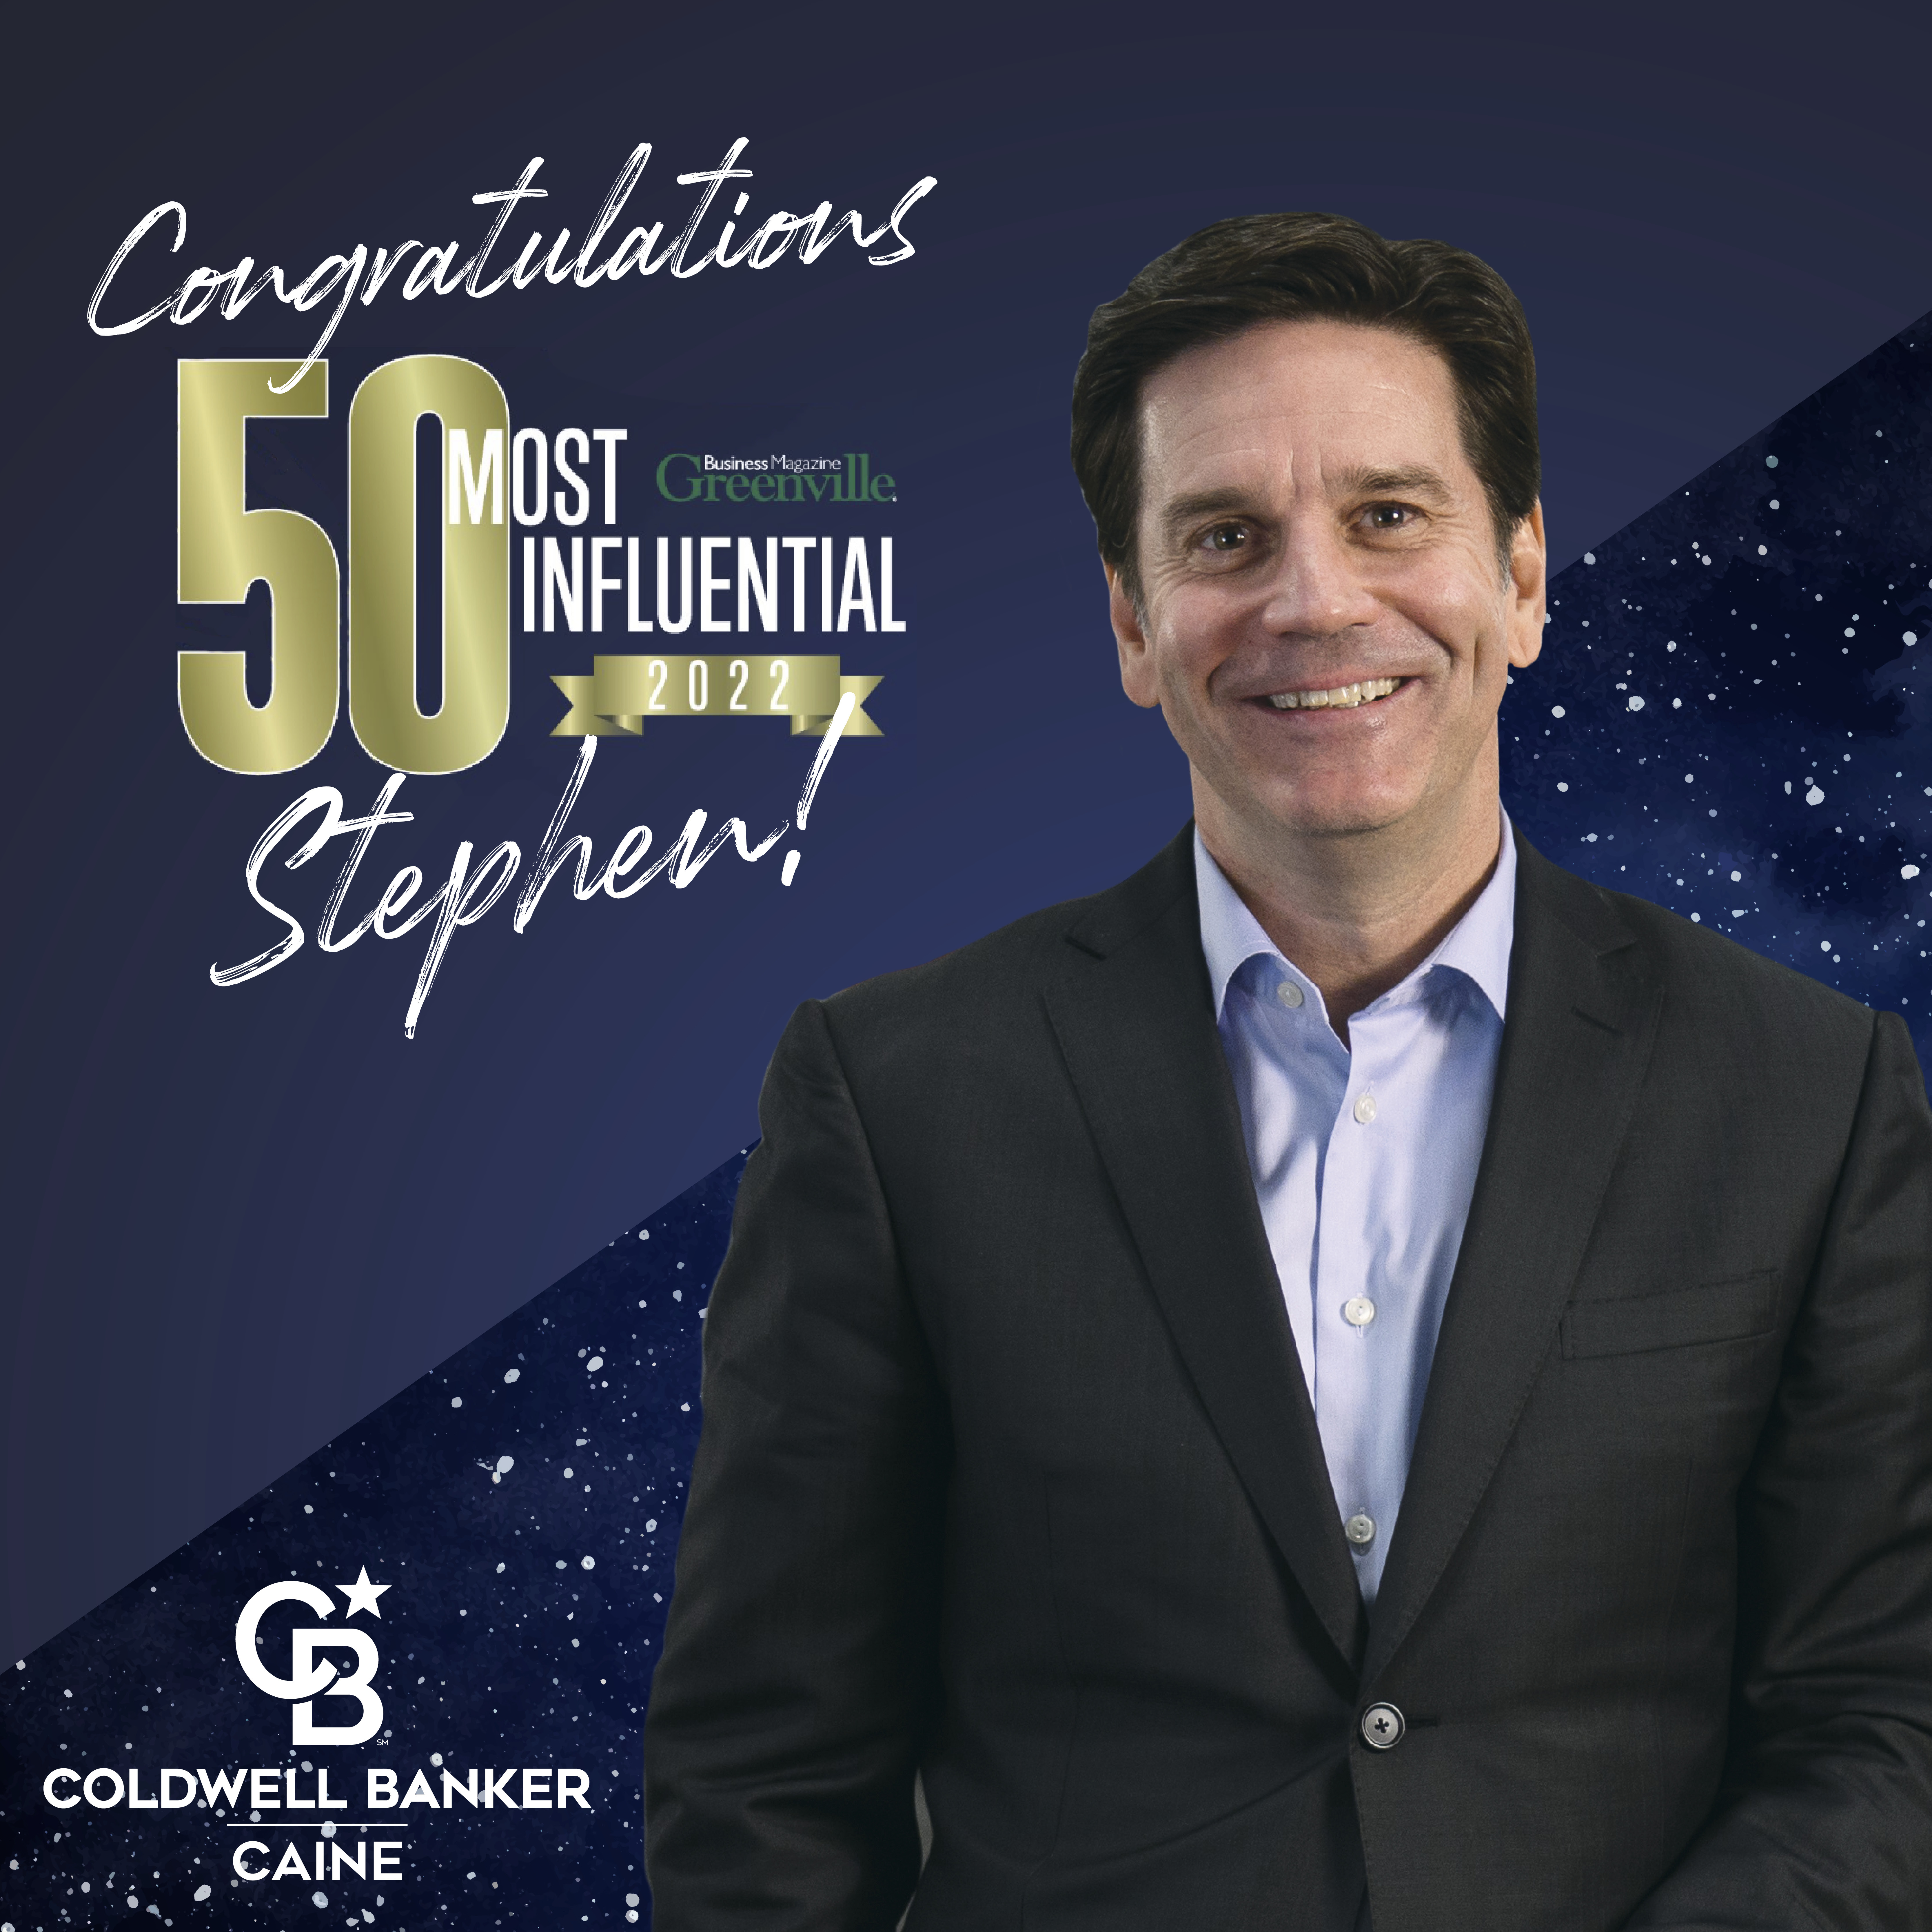 Stephen Edgerton Named 50 Most Influential of 2022 by Greenville Business Magazine